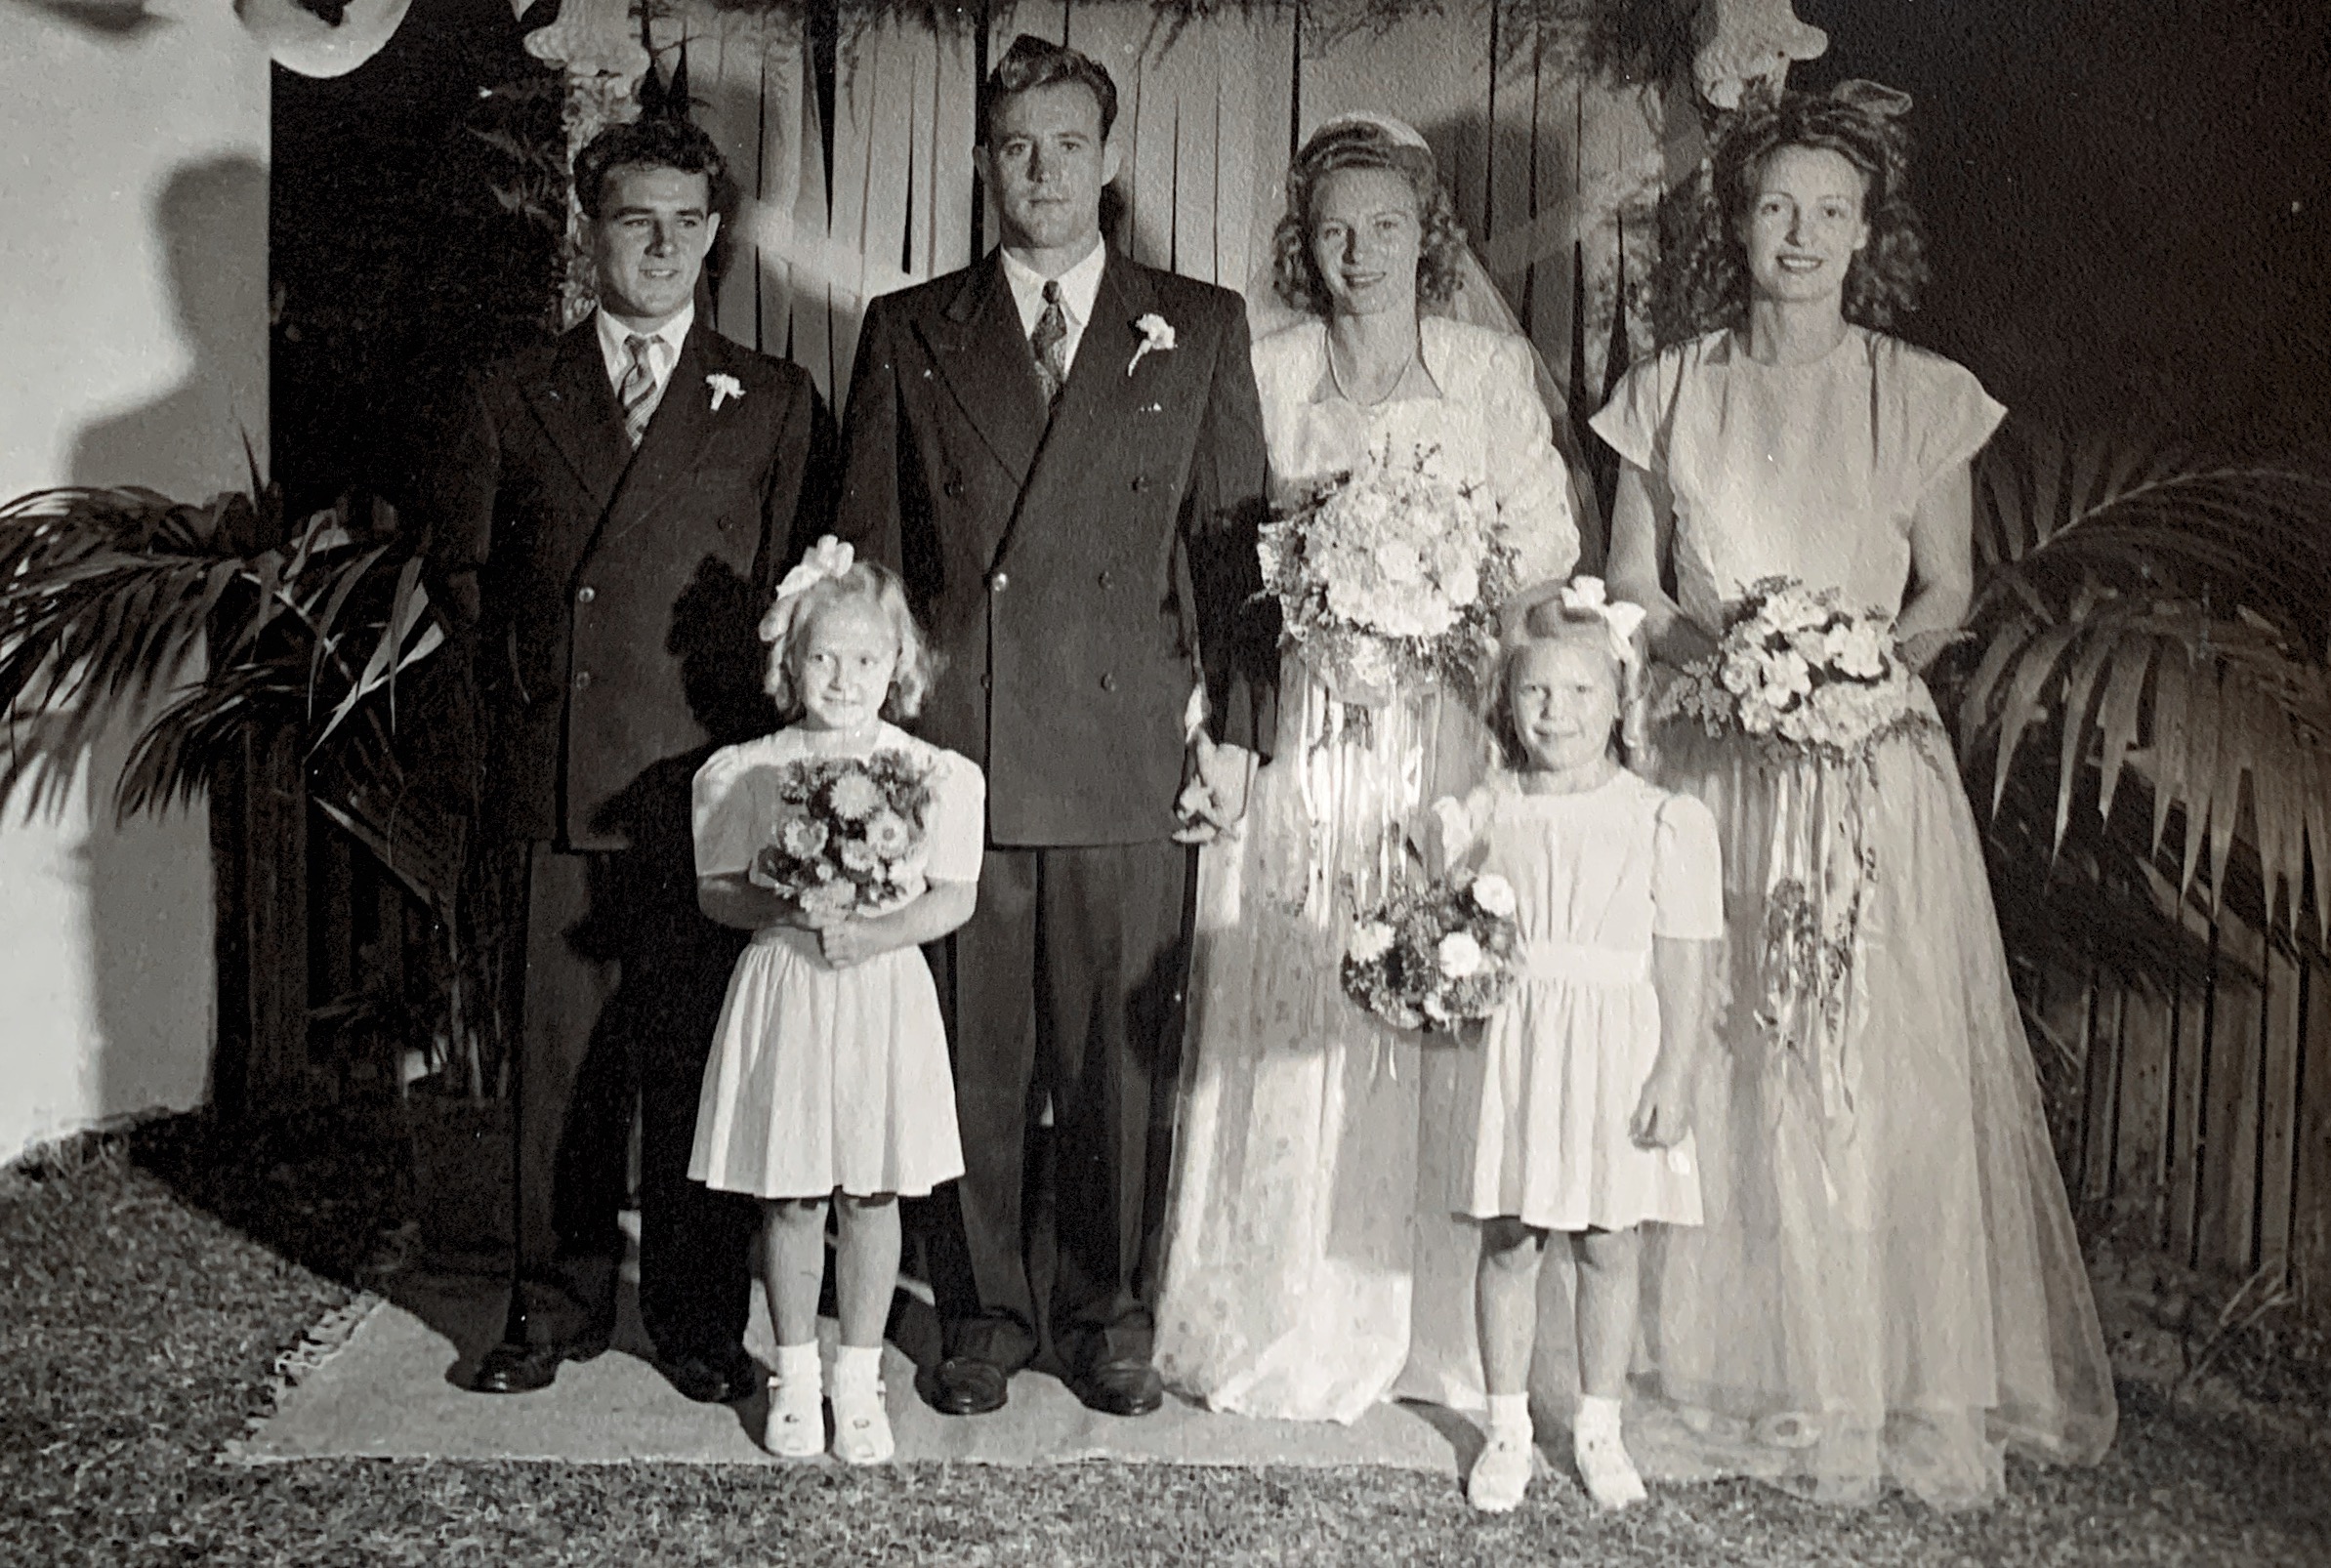 Joseph and Ethel Evans marriage August 26, 1946